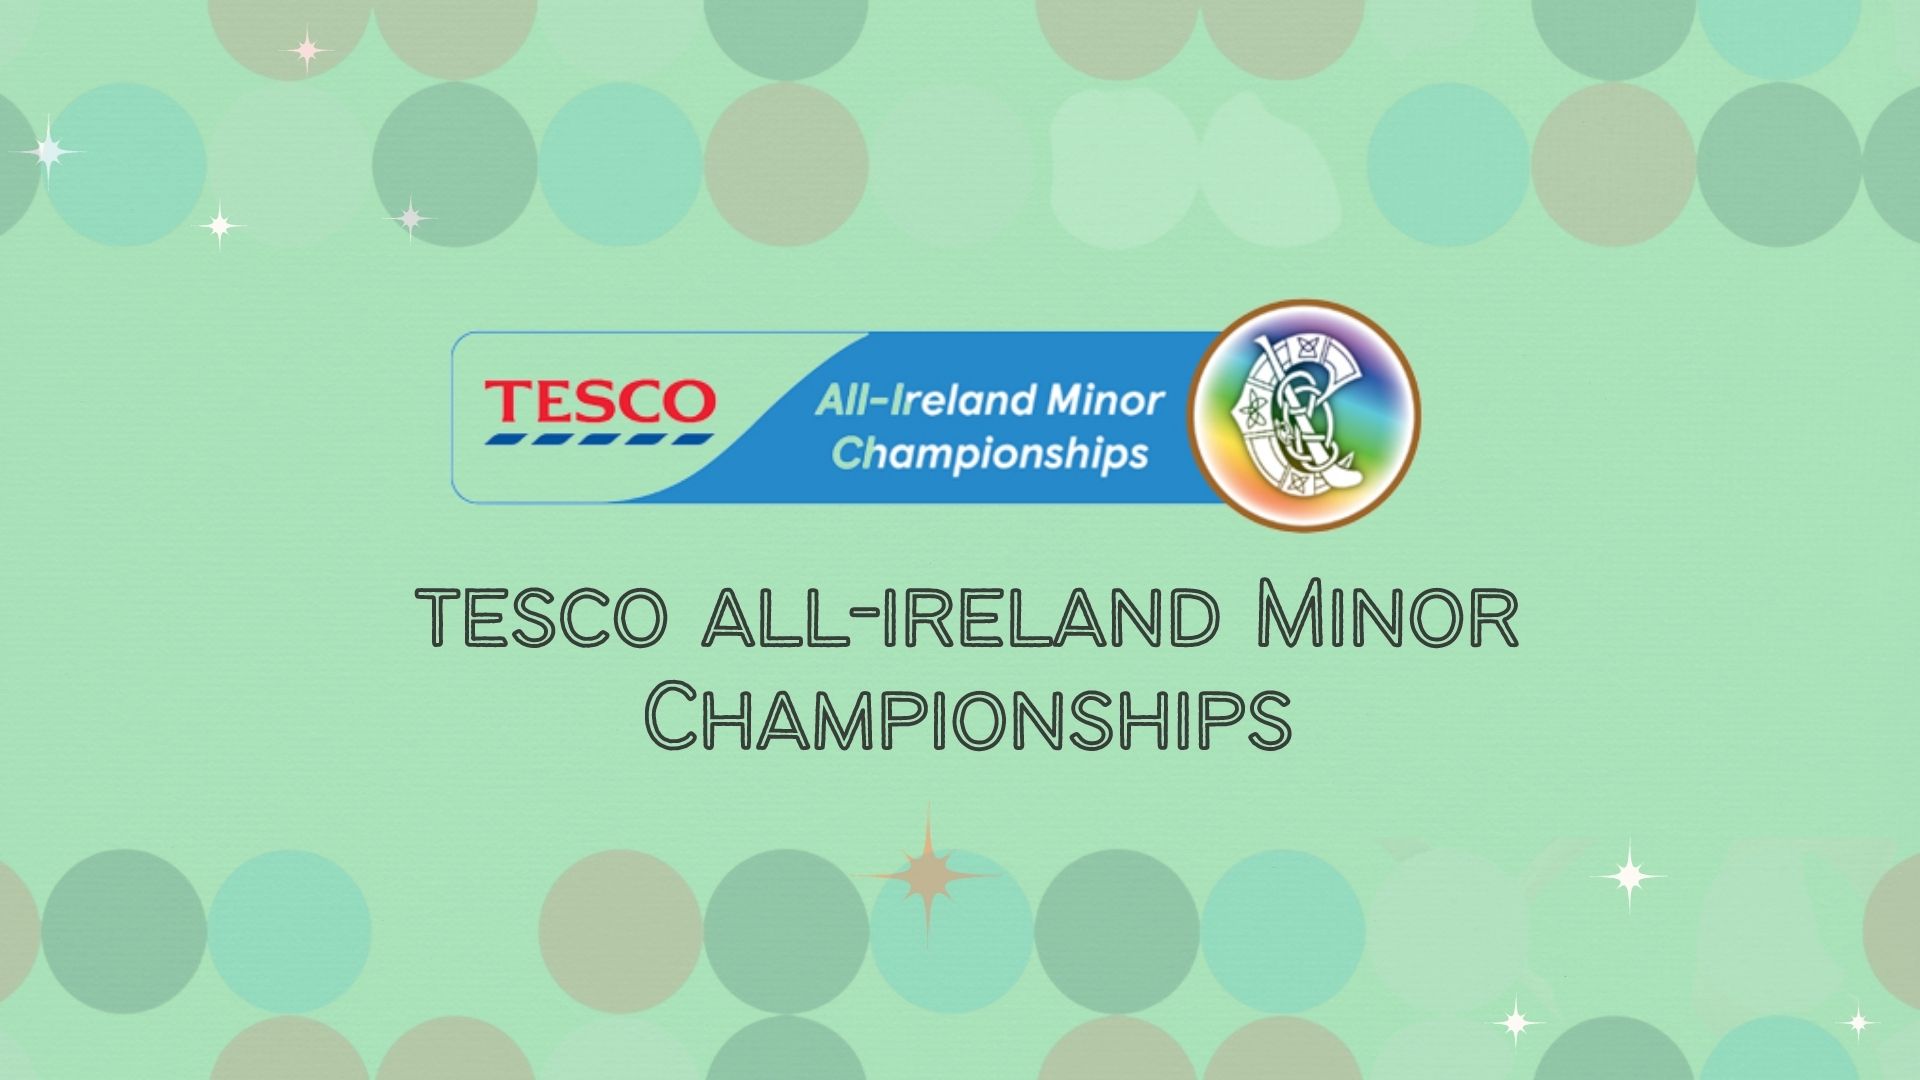 RESULTS: Tesco All-Ireland Minor Championships, March 26th & 27th